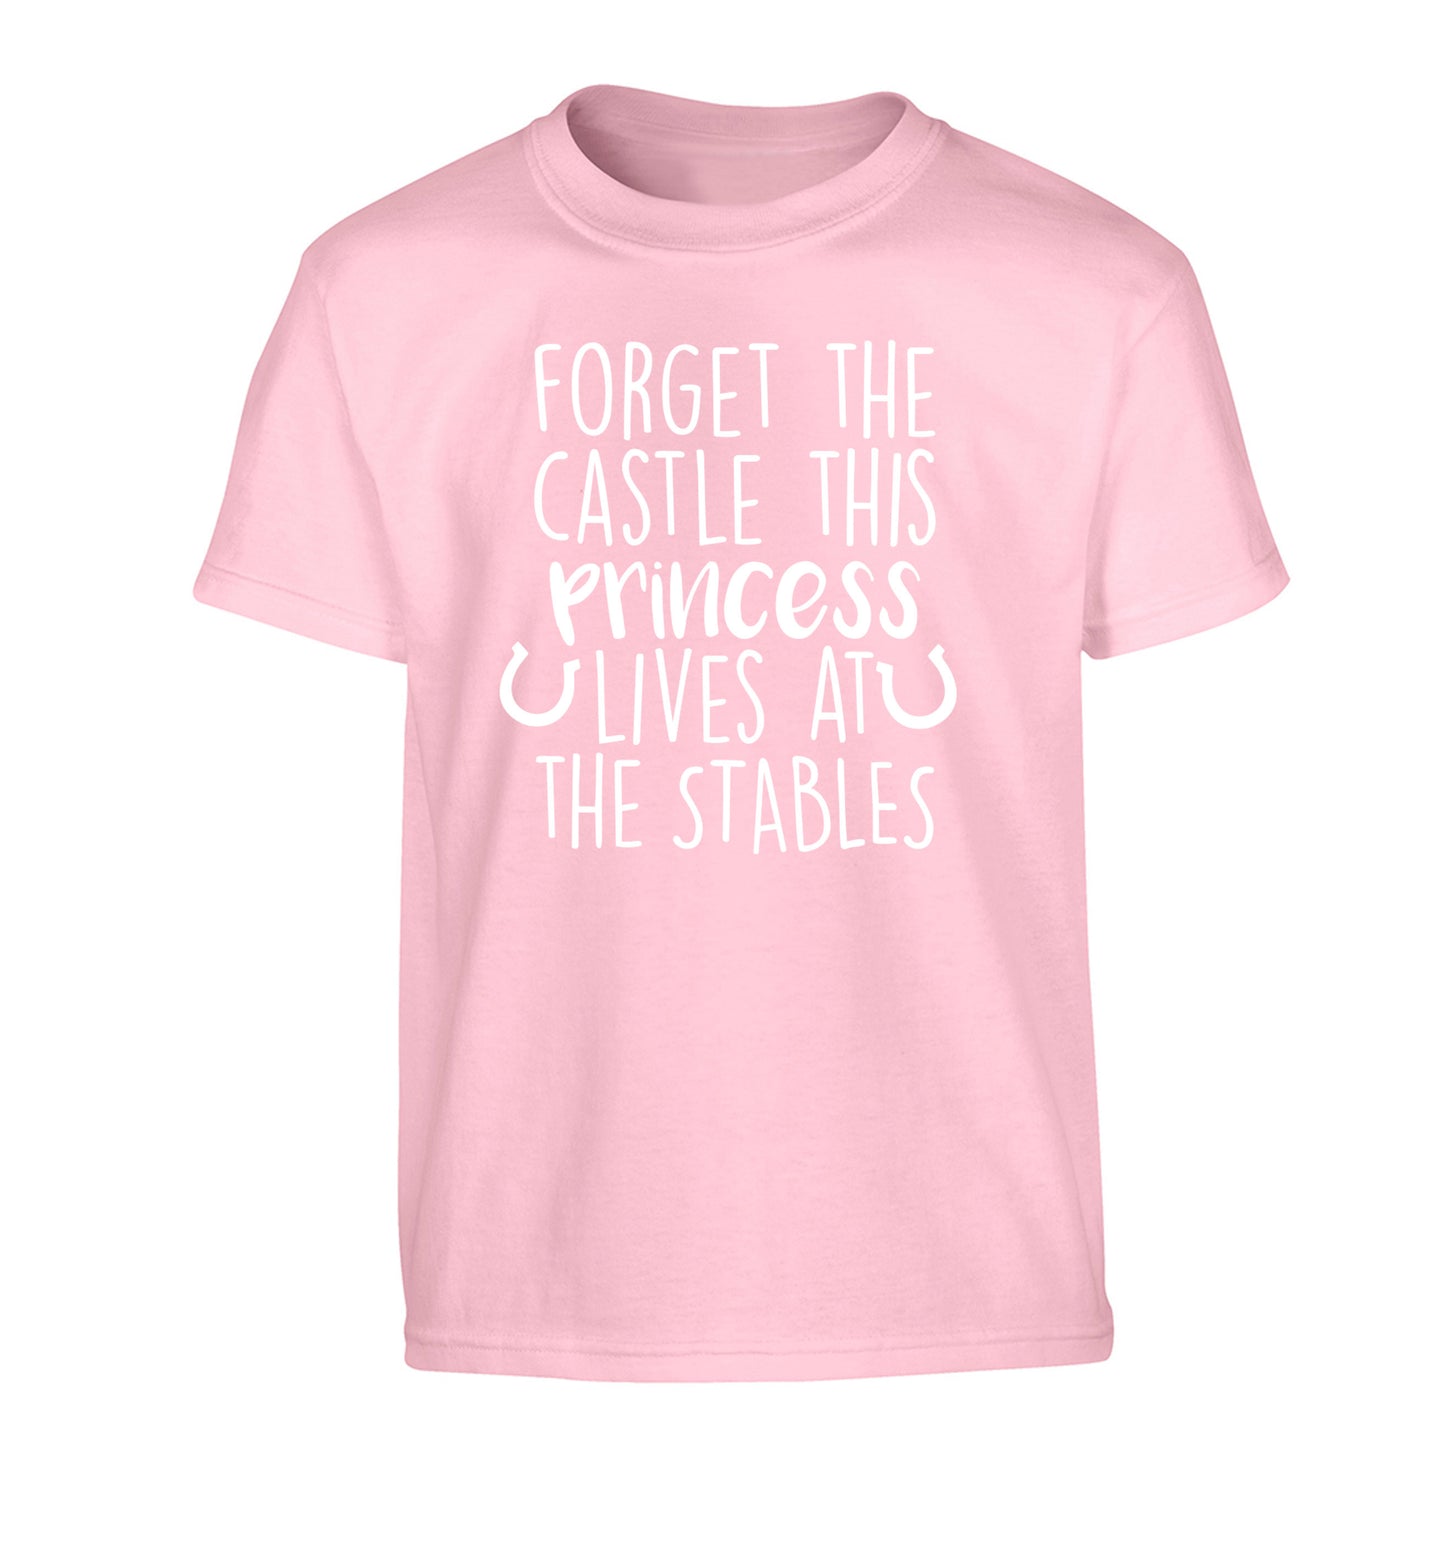 Forget the castle this princess lives at the stables Children's light pink Tshirt 12-14 Years